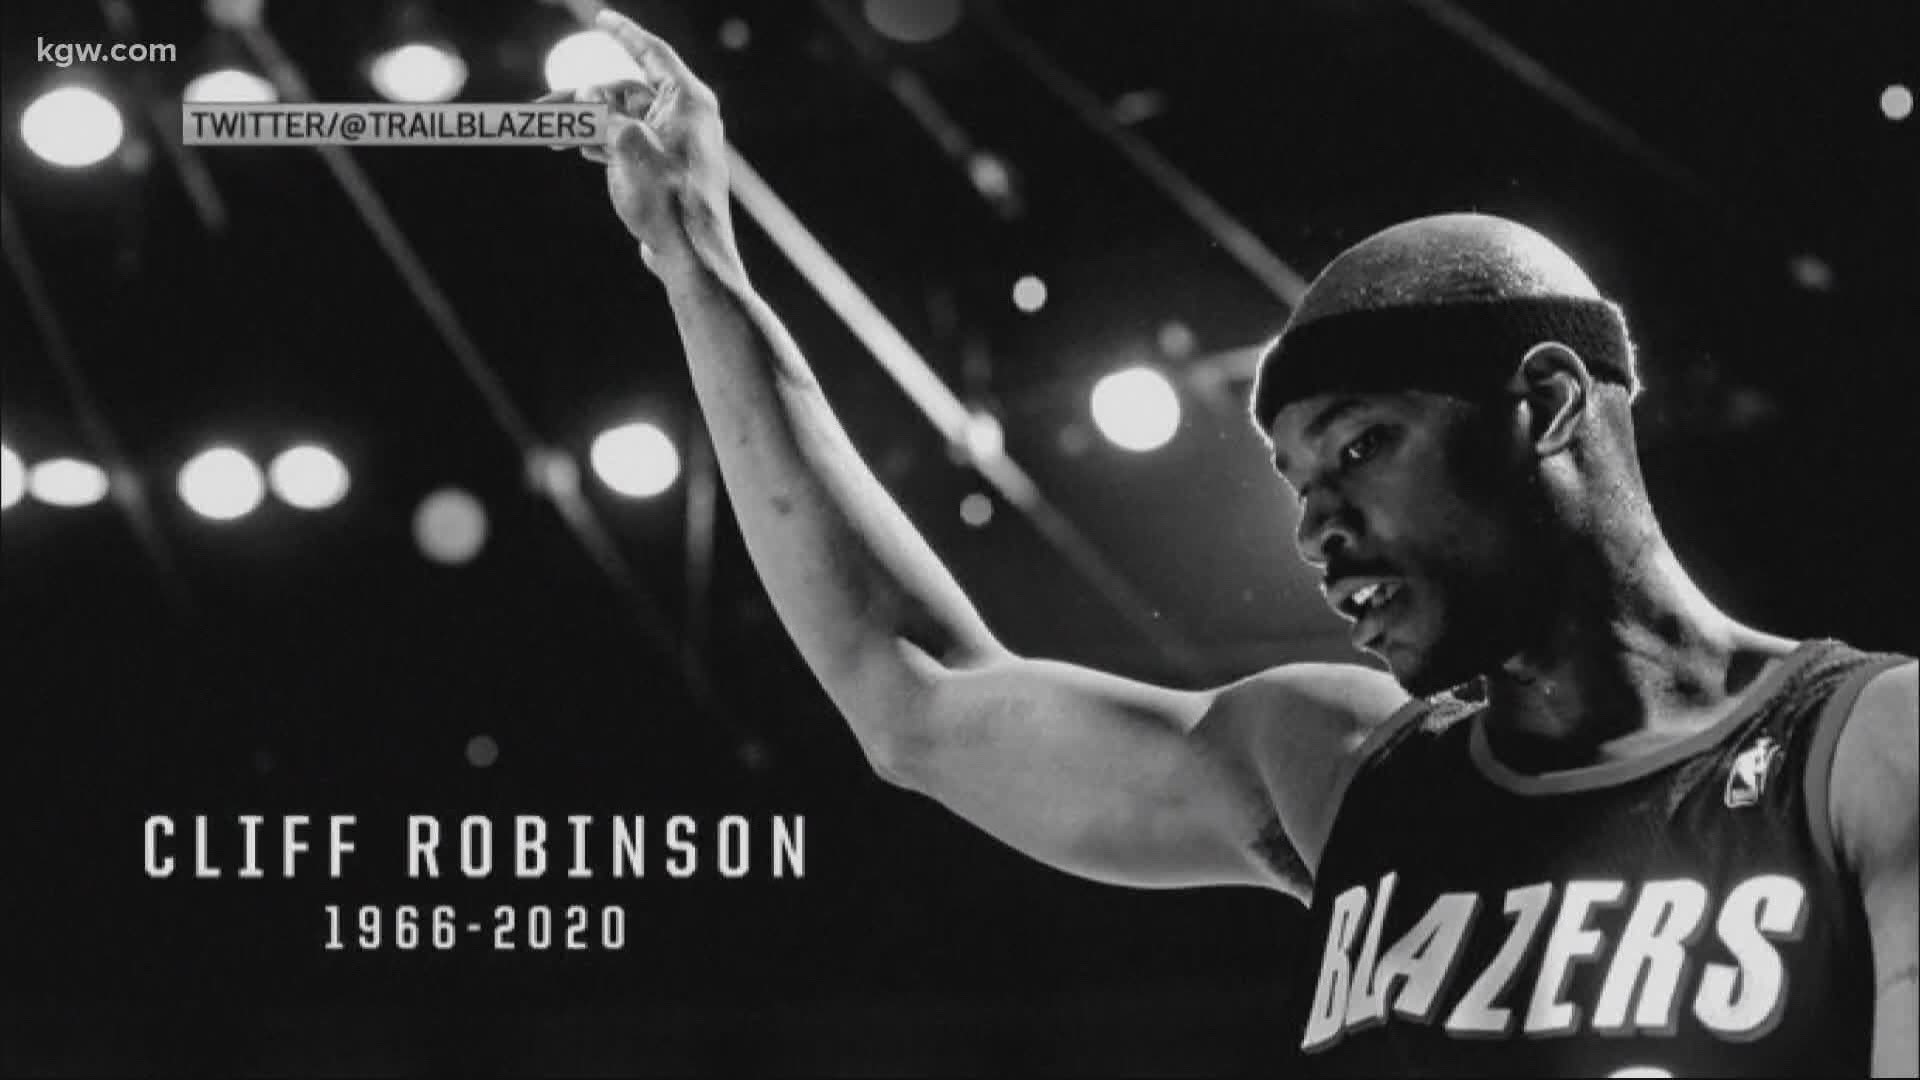 Let's go into the KGW vault to look back at the life and career of Cliff Robinson.